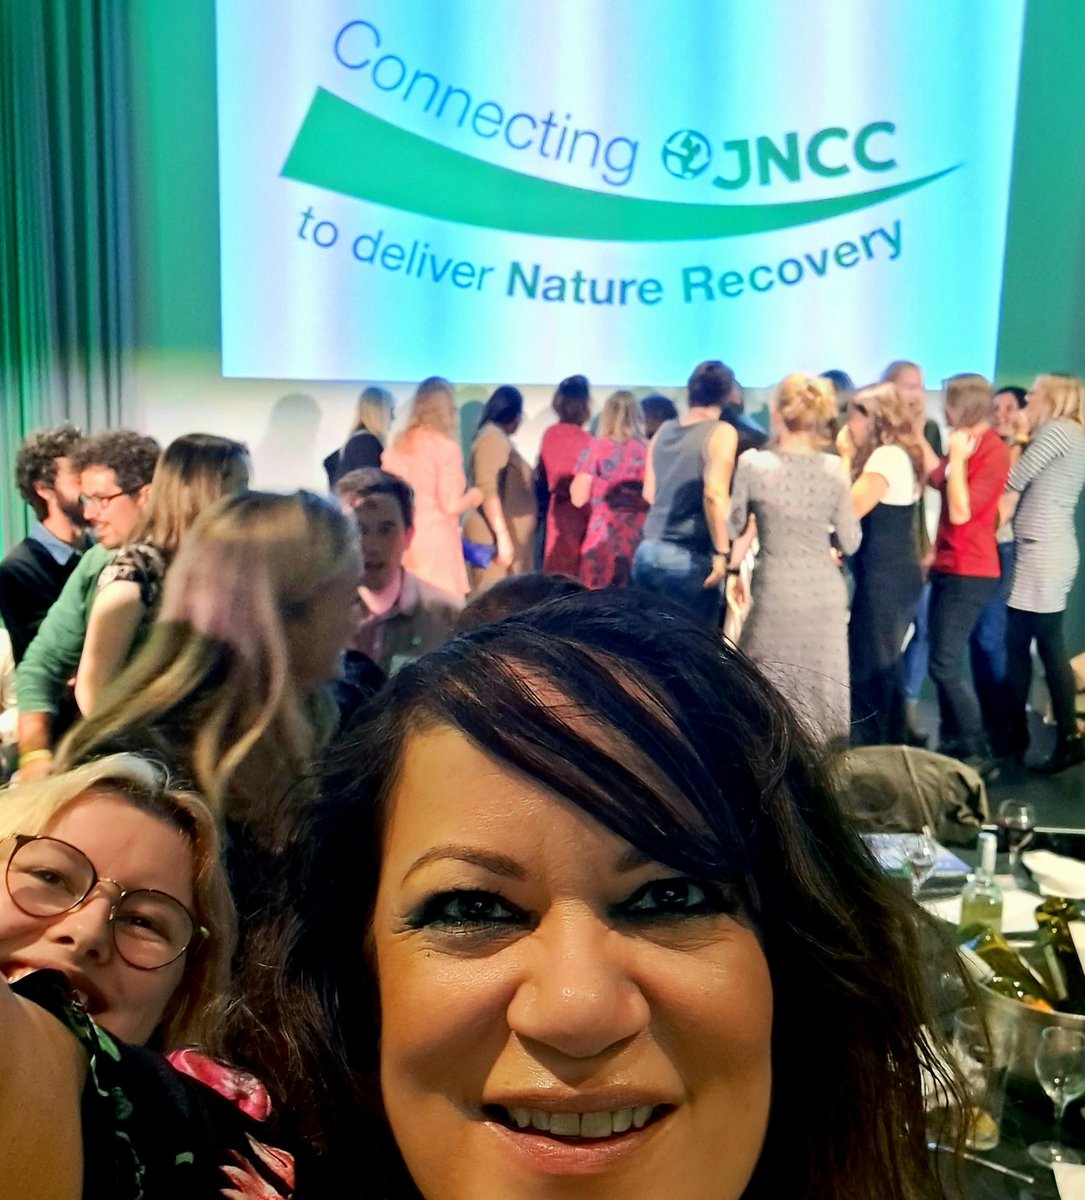 Joy, hope, love & laughter at @JNCC_UK conference - Connecting JNCC to Deliver Nature Recovery 🙌🏾

💚 Co-creating & committing to our ambitious vision
💚 Connecting for a more inclusive workplace
💚 Collaborating with our Joint Committee 
#TogetherForNature
#ForNaturePeoplePlanet